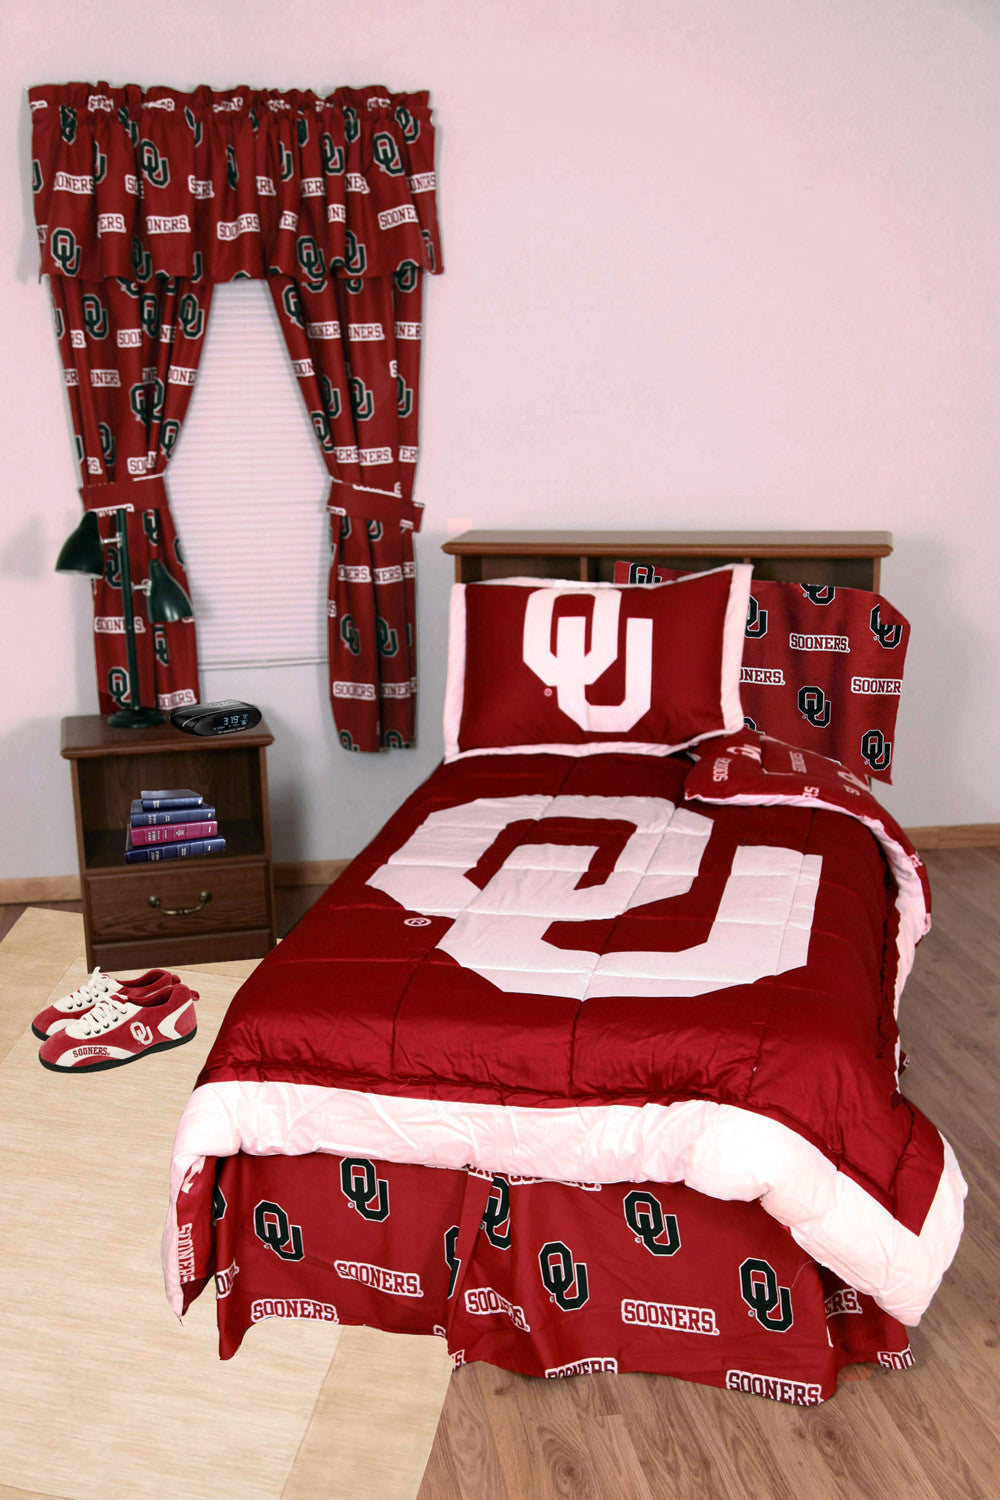 Oklahoma Bed In A Bag Queen - With Team Colored Sheets - Oklbbqu By College Covers